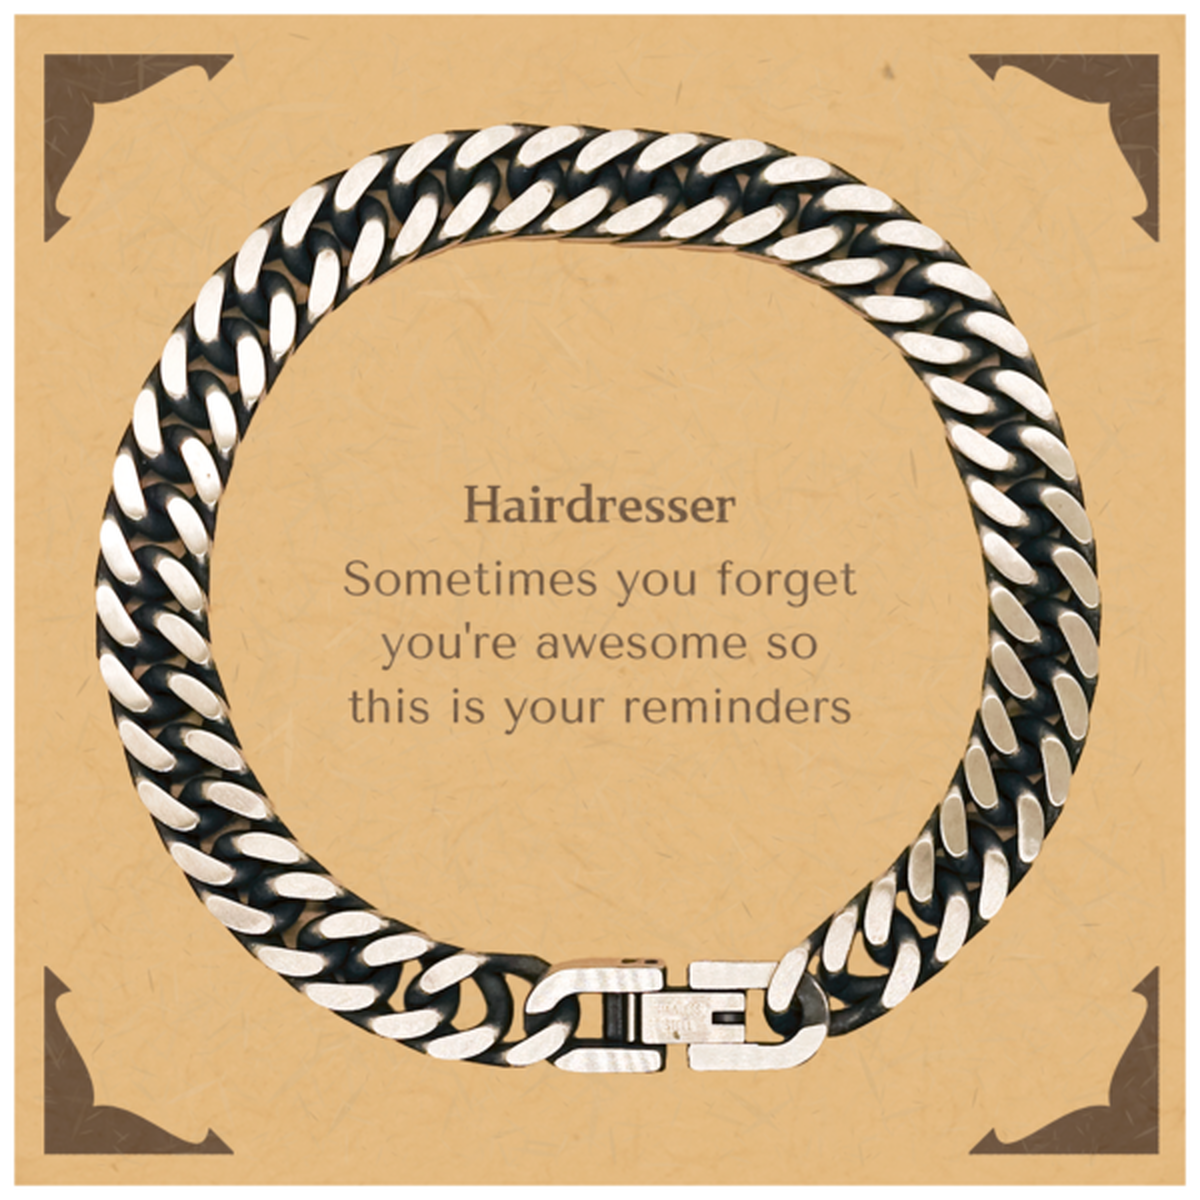 Sentimental Hairdresser Cuban Link Chain Bracelet, Hairdresser Sometimes you forget you're awesome so this is your reminders, Graduation Christmas Birthday Gifts for Hairdresser, Men, Women, Coworkers